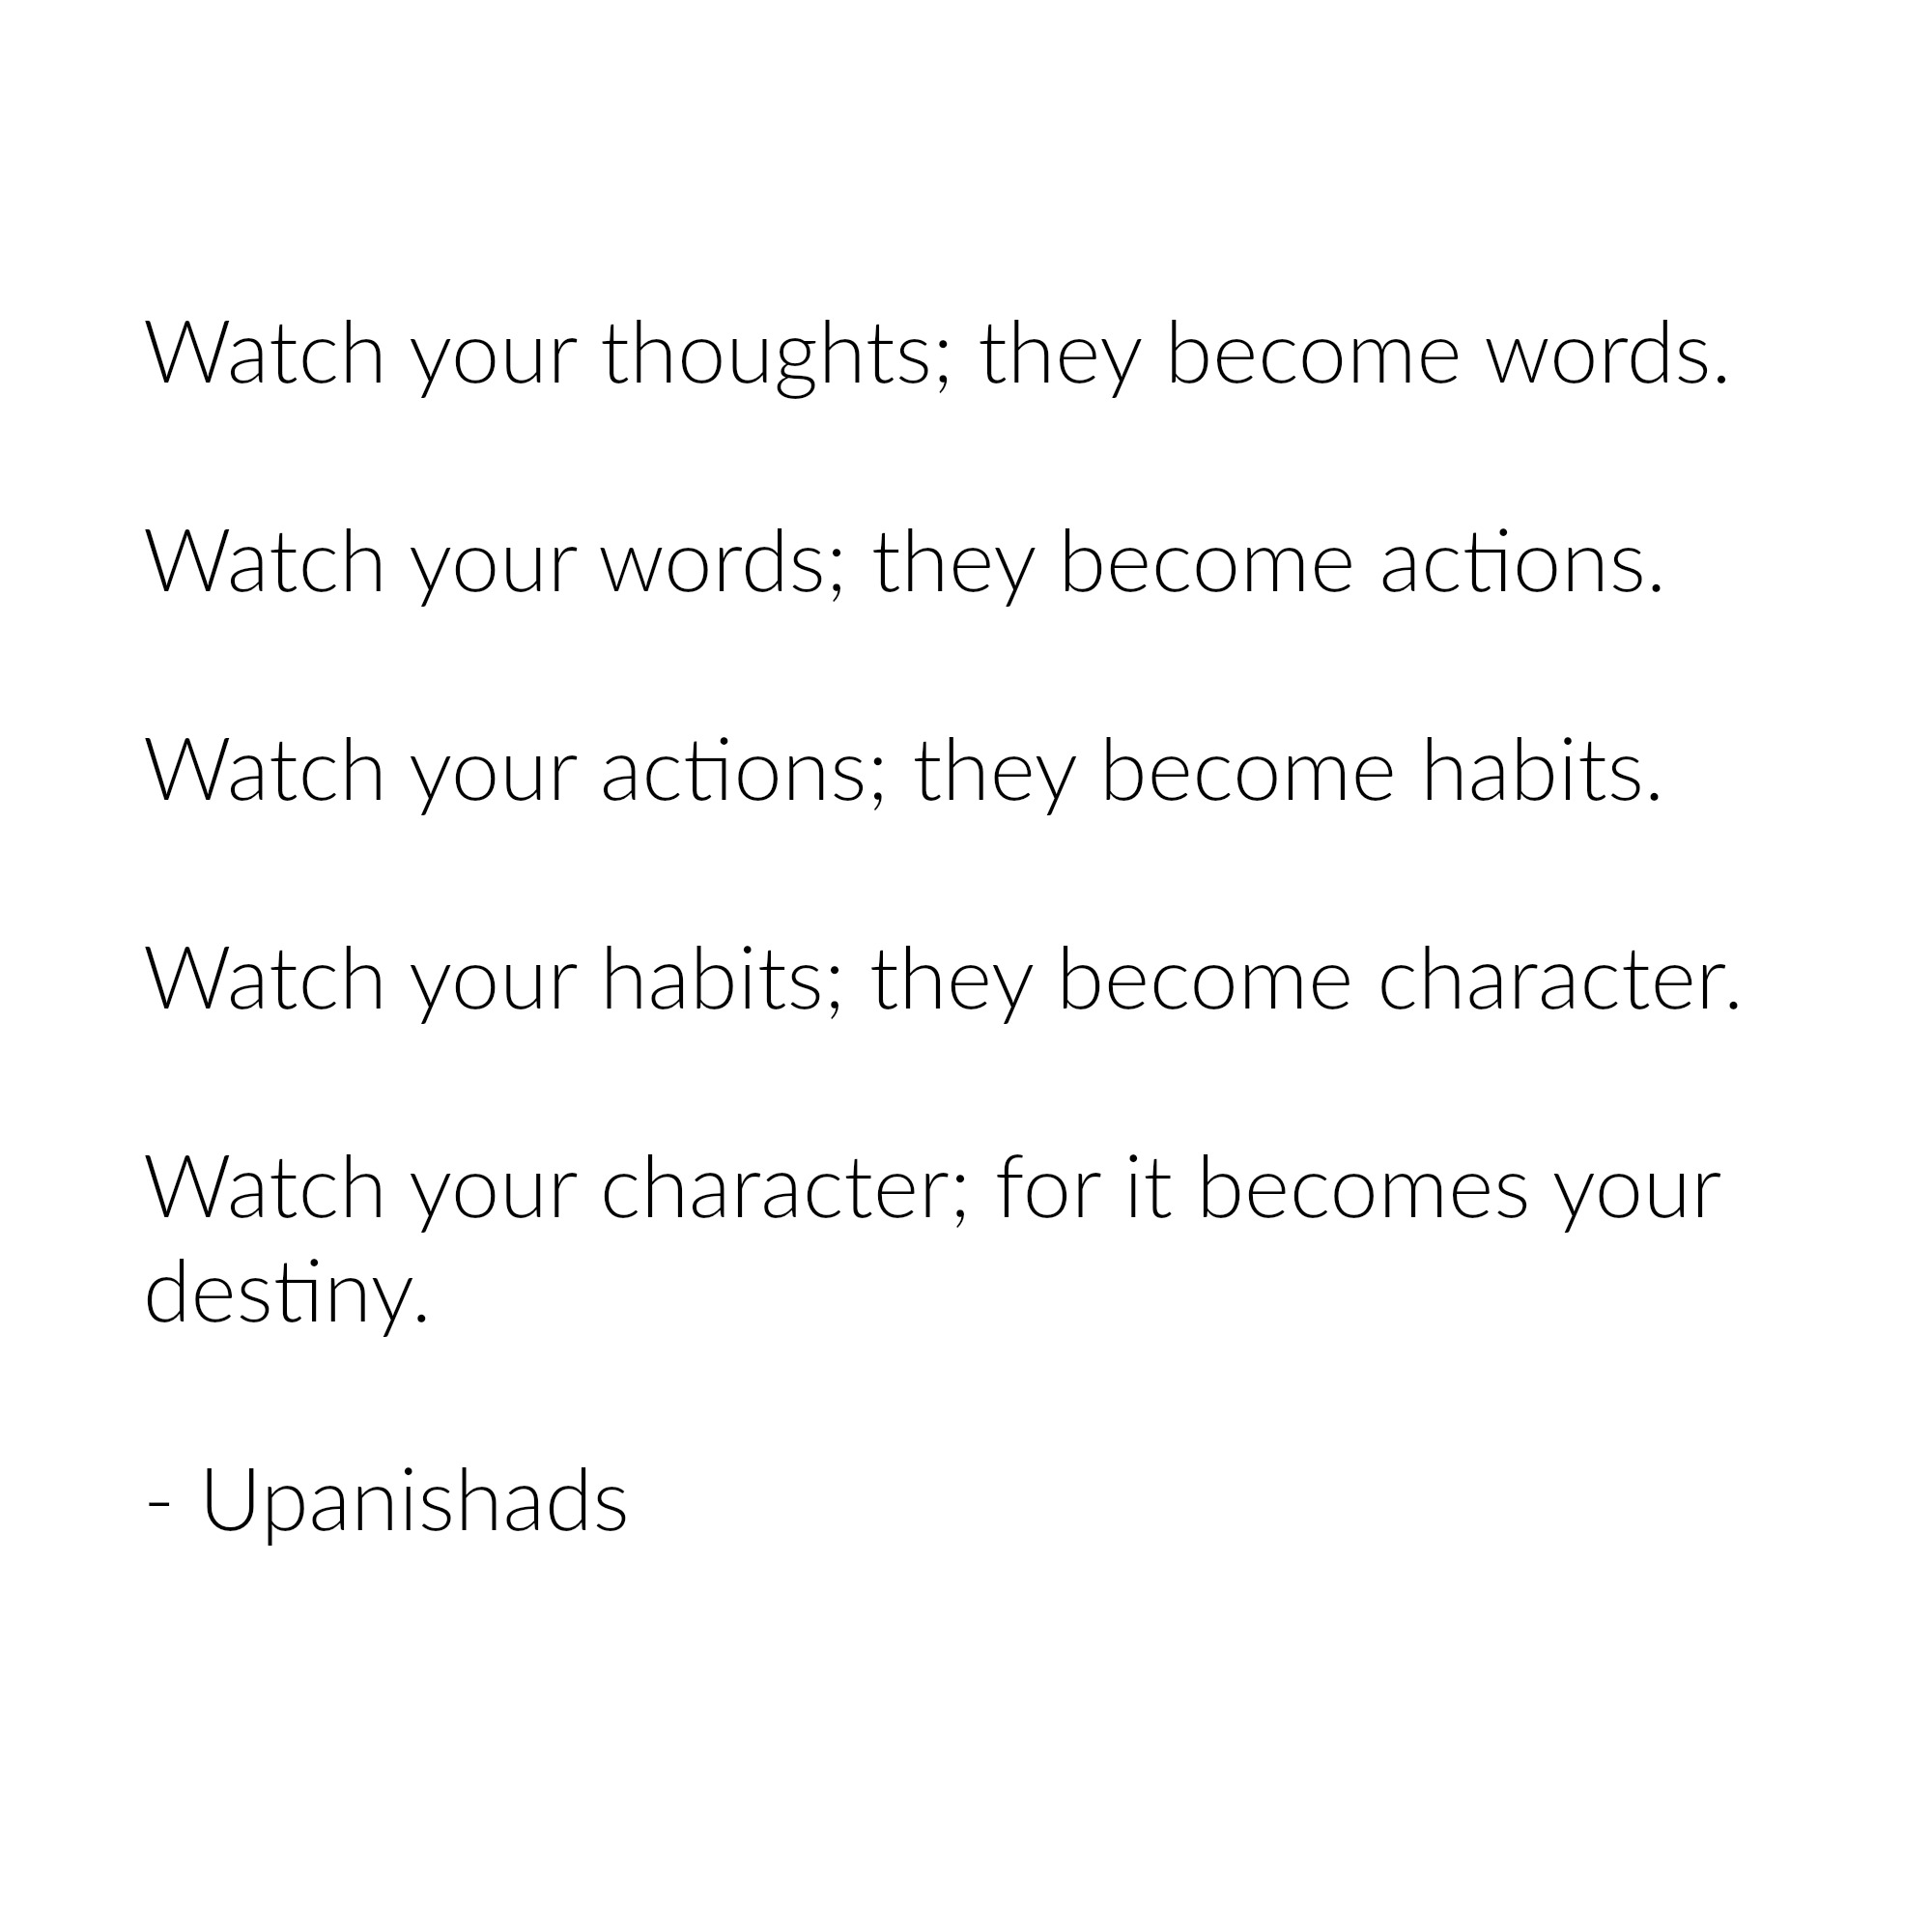 Upanishads quote your thoughts